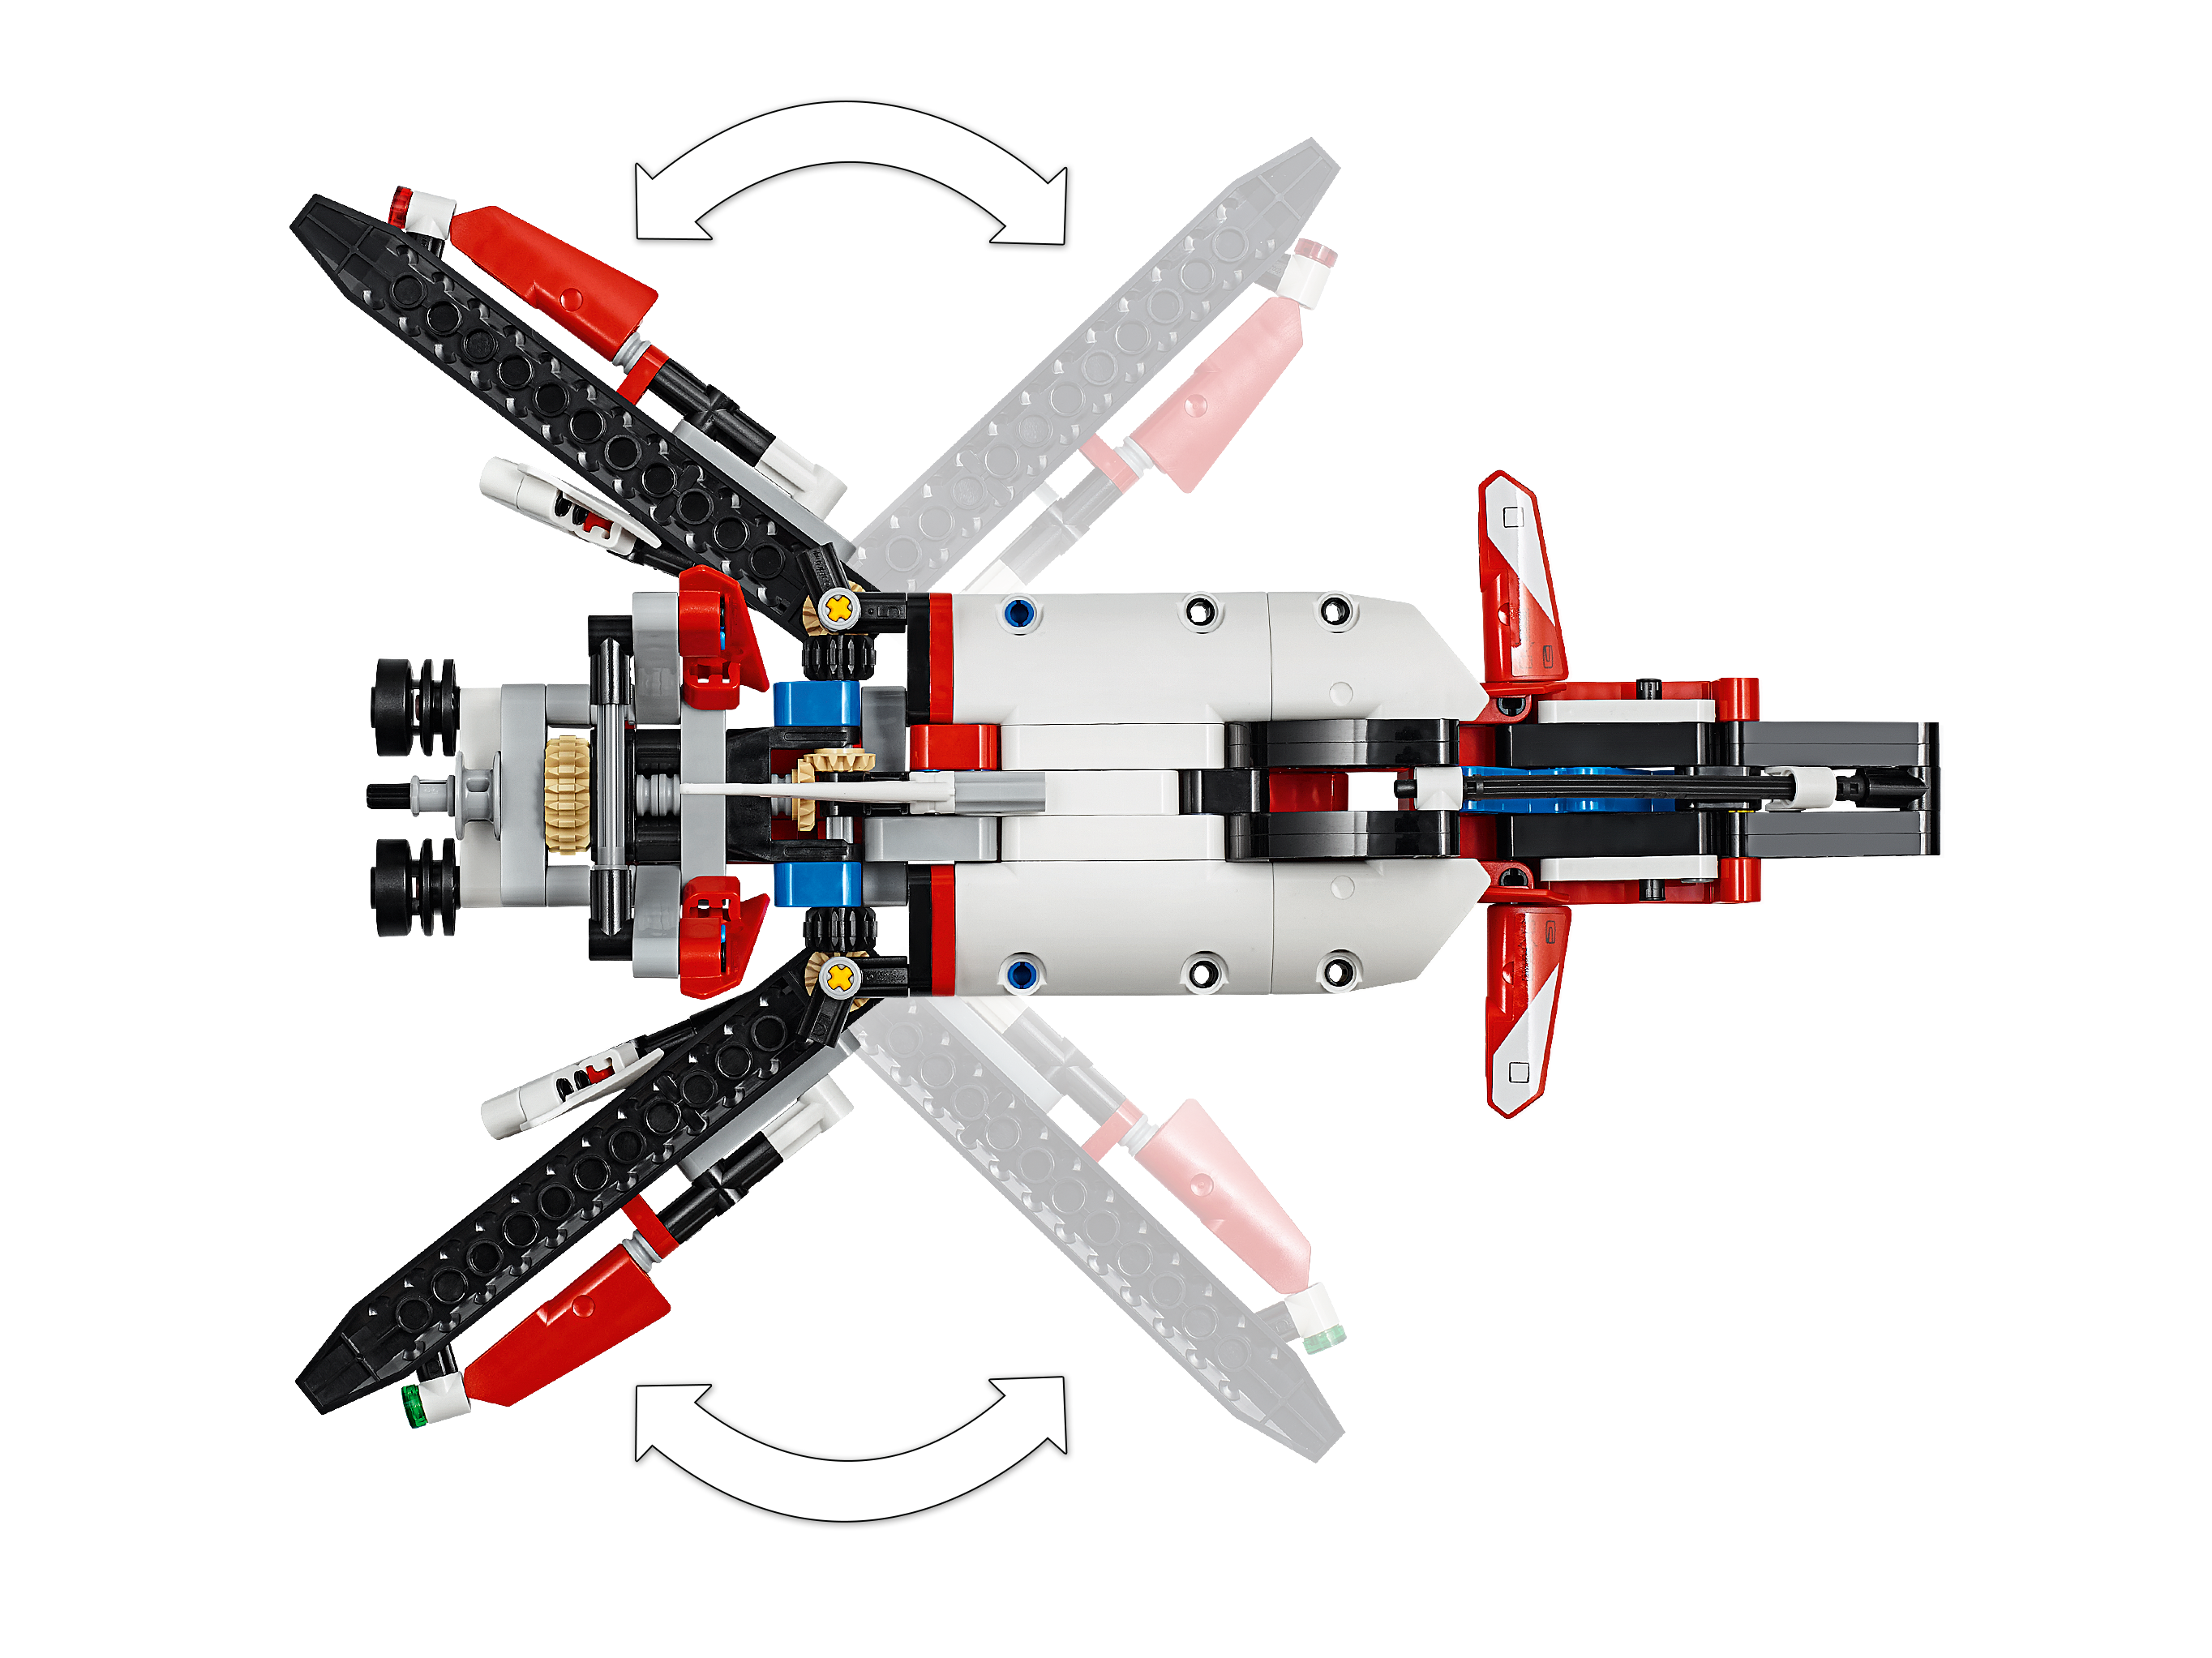 Estima Stereotip Clancy  Rescue Helicopter 42092 | Technic™ | Buy online at the Official LEGO® Shop  US